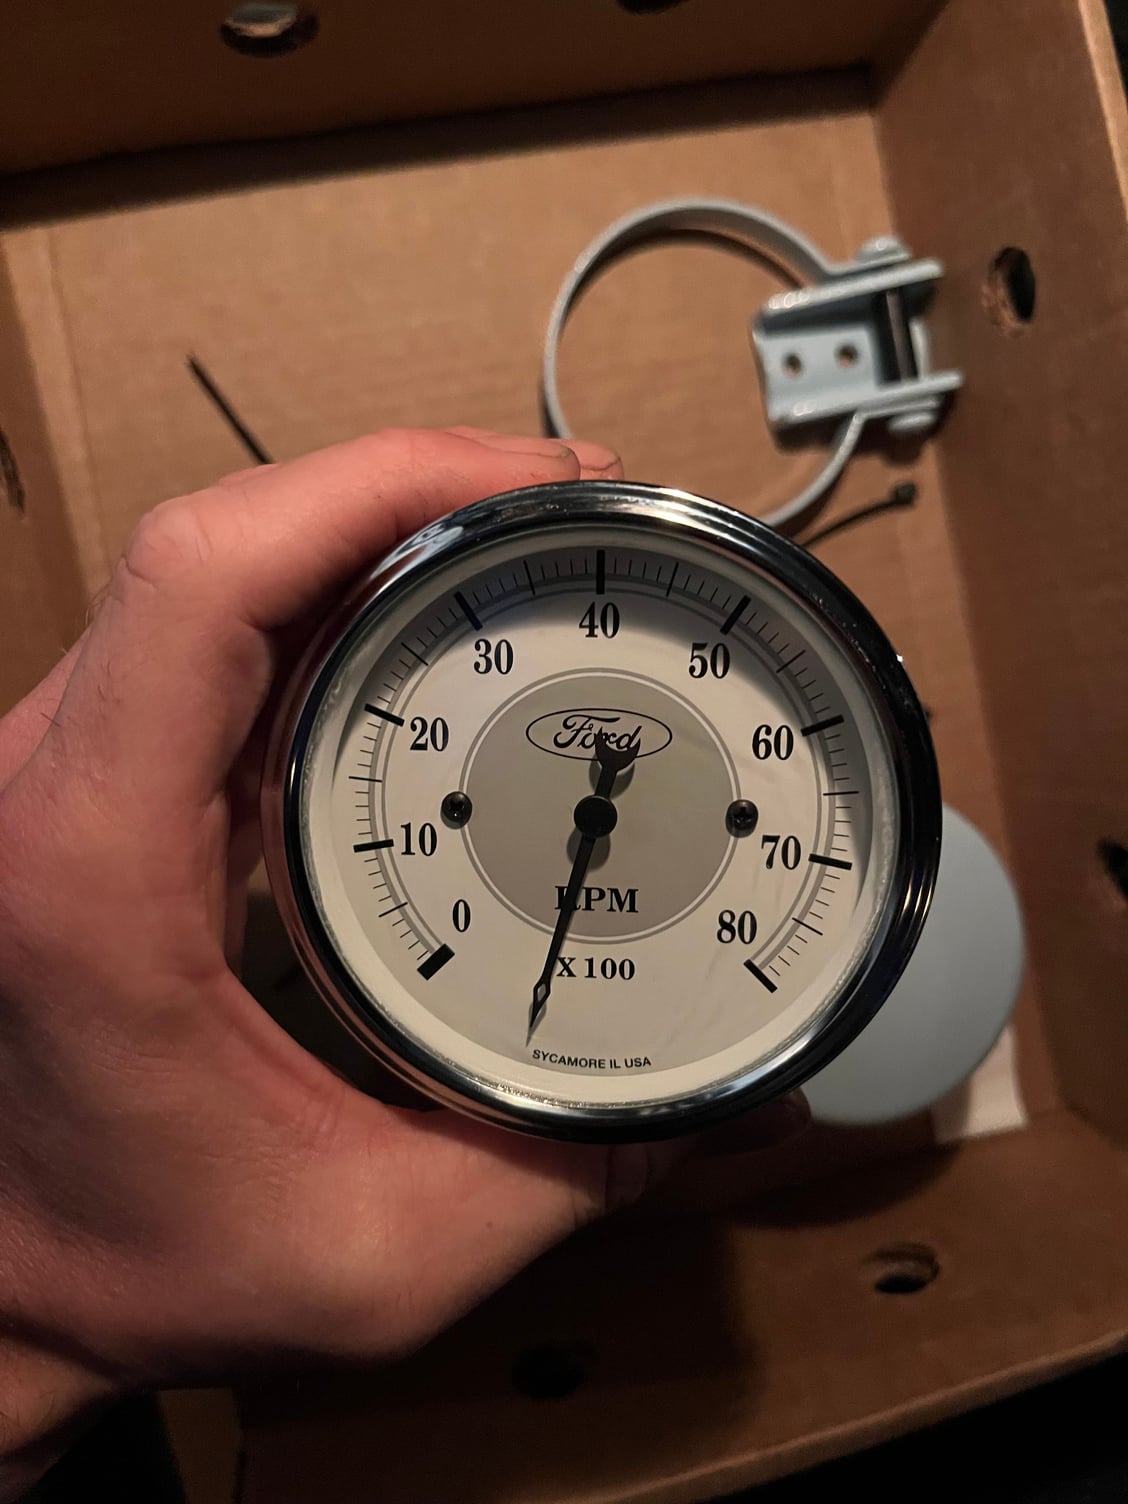 Exterior Tach - what do you think? - Ford Truck Enthusiasts Forums